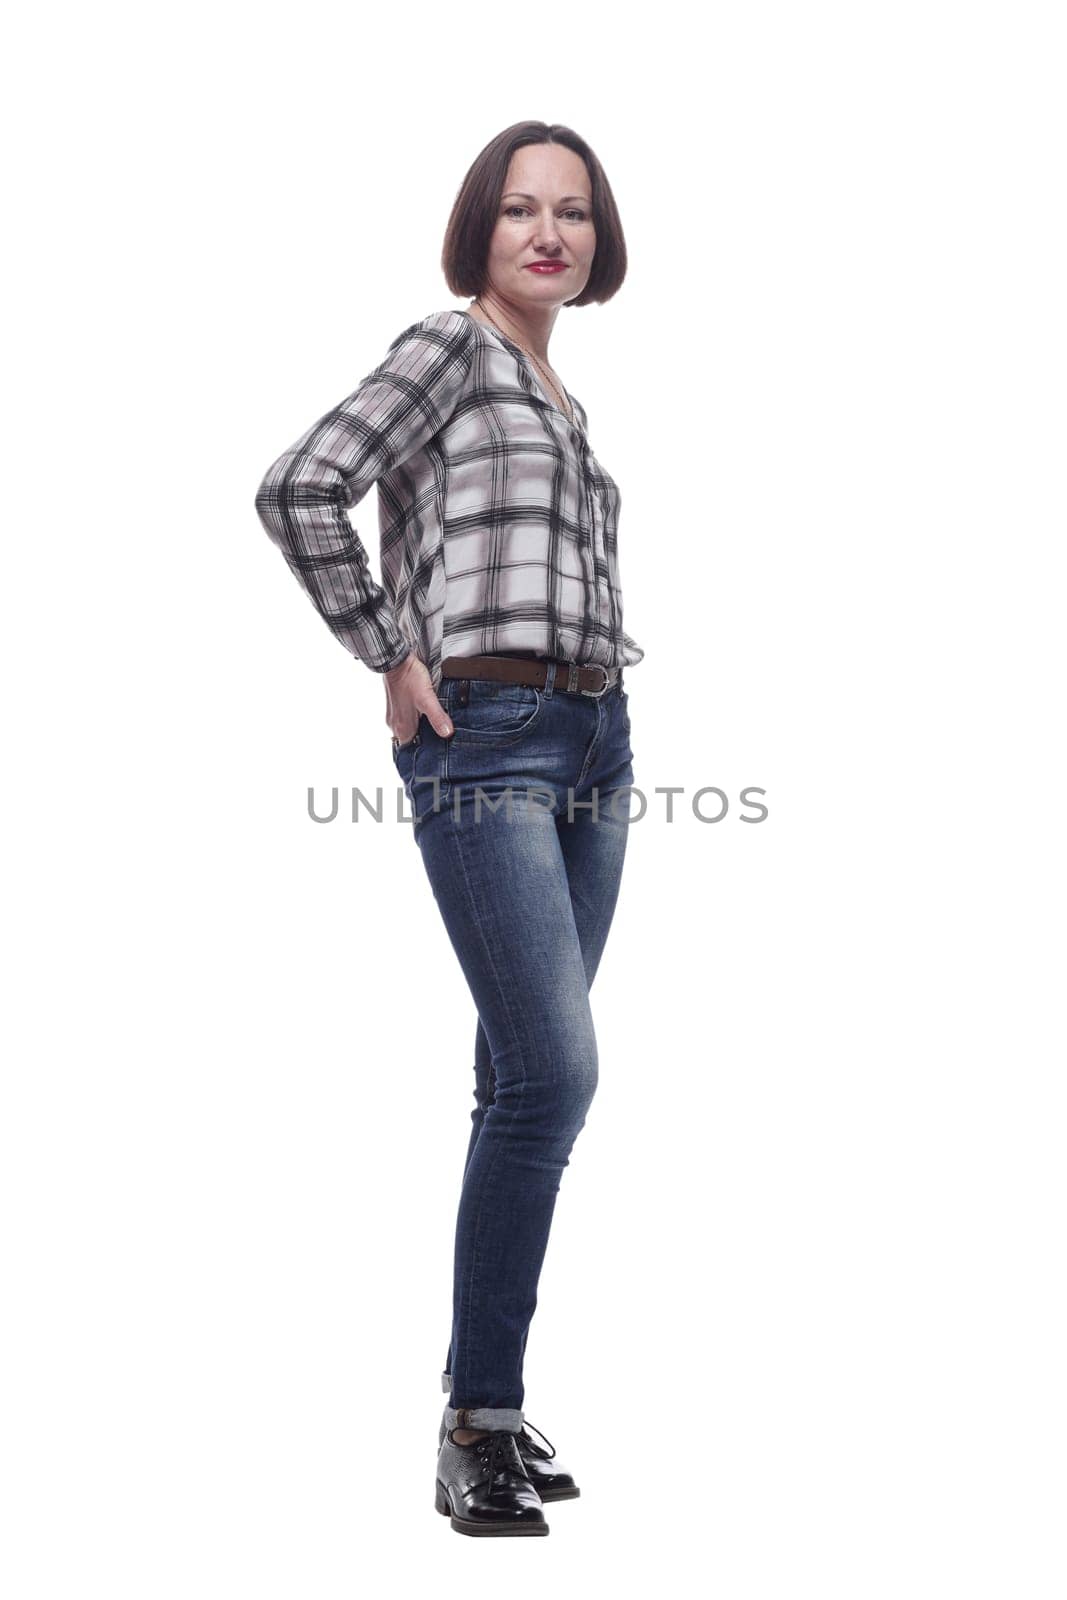 in full growth. attractive mature woman in jeans looking at you . isolated on a white background.